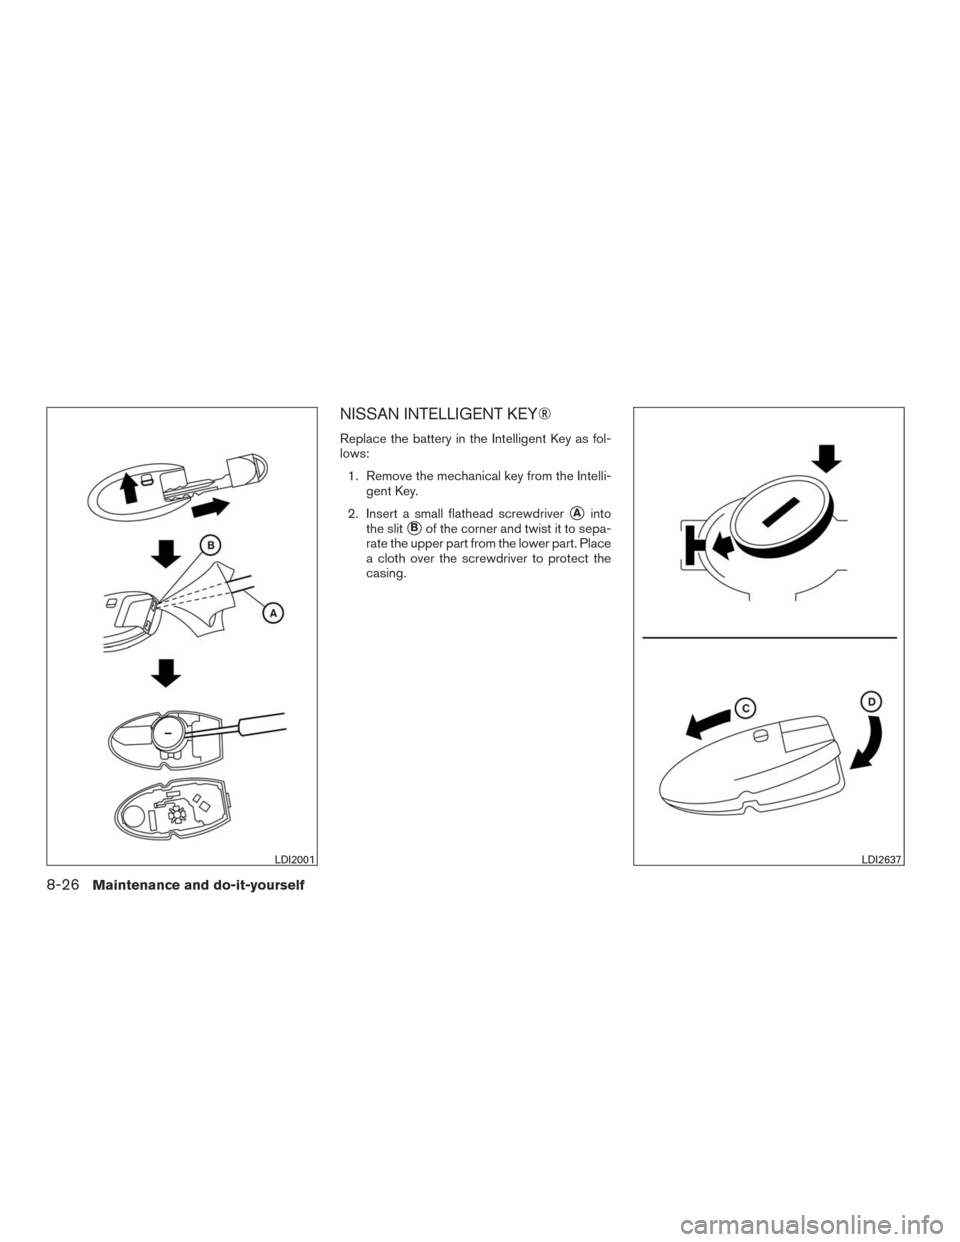 NISSAN MURANO 2016 3.G Owners Manual NISSAN INTELLIGENT KEY®
Replace the battery in the Intelligent Key as fol-
lows:
1. Remove the mechanical key from the Intelli-
gent Key.
2. Insert a small flathead screwdriver
Ainto
the slit
Bof t